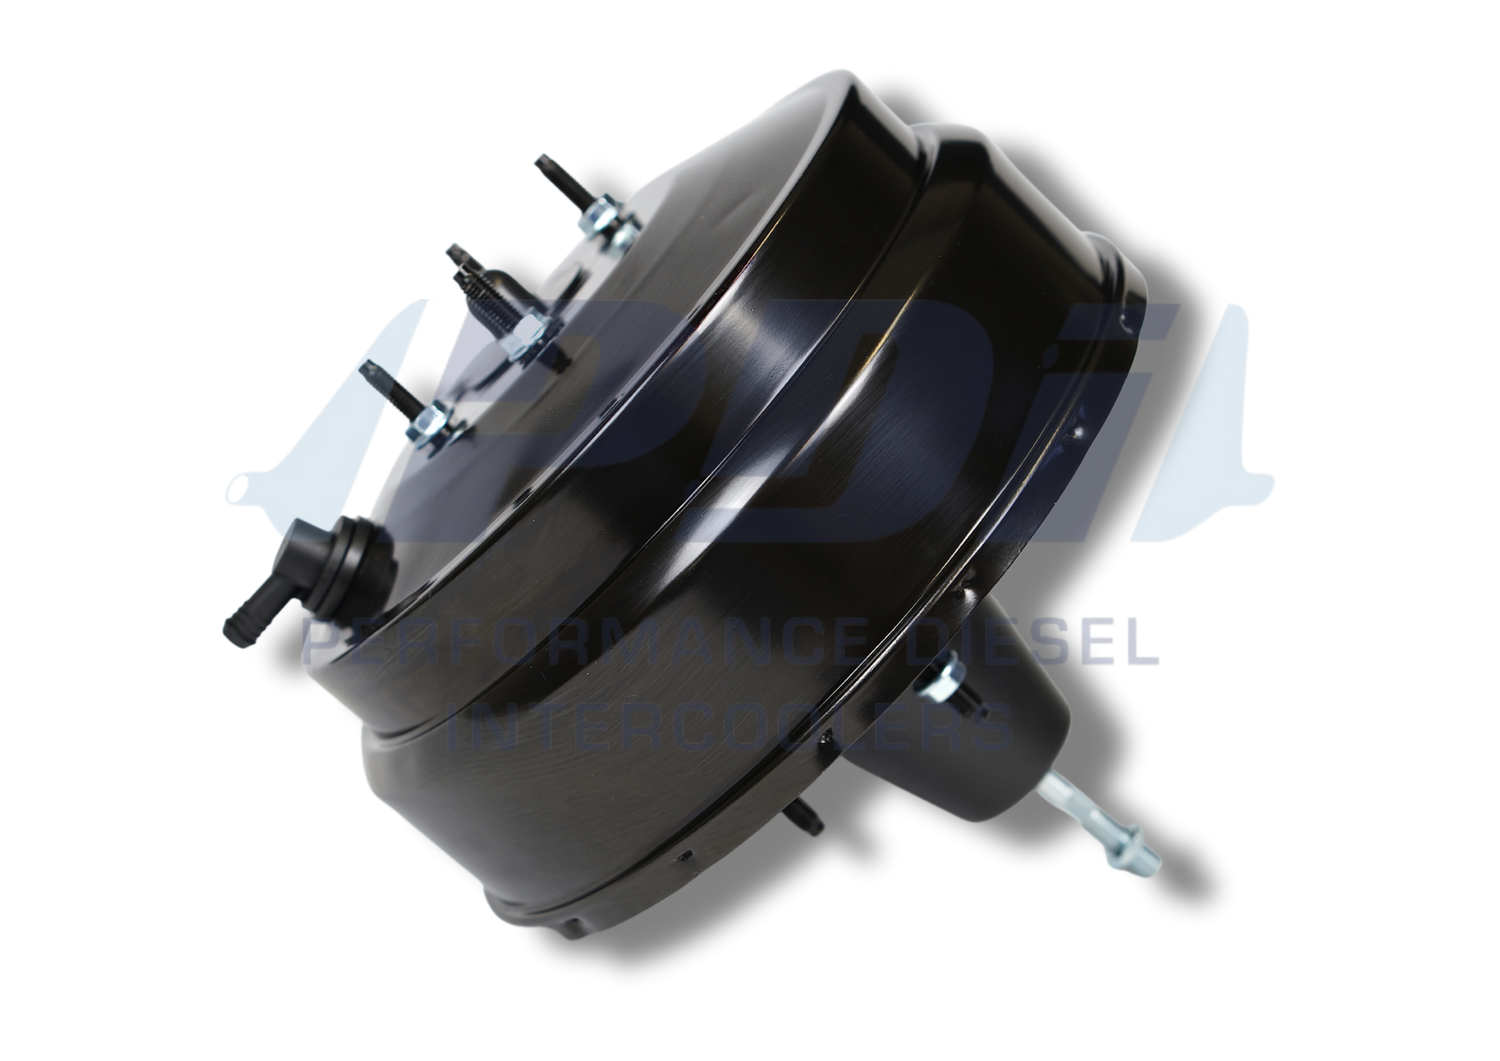 Brake Booster 60 series (with 4 bolt master)